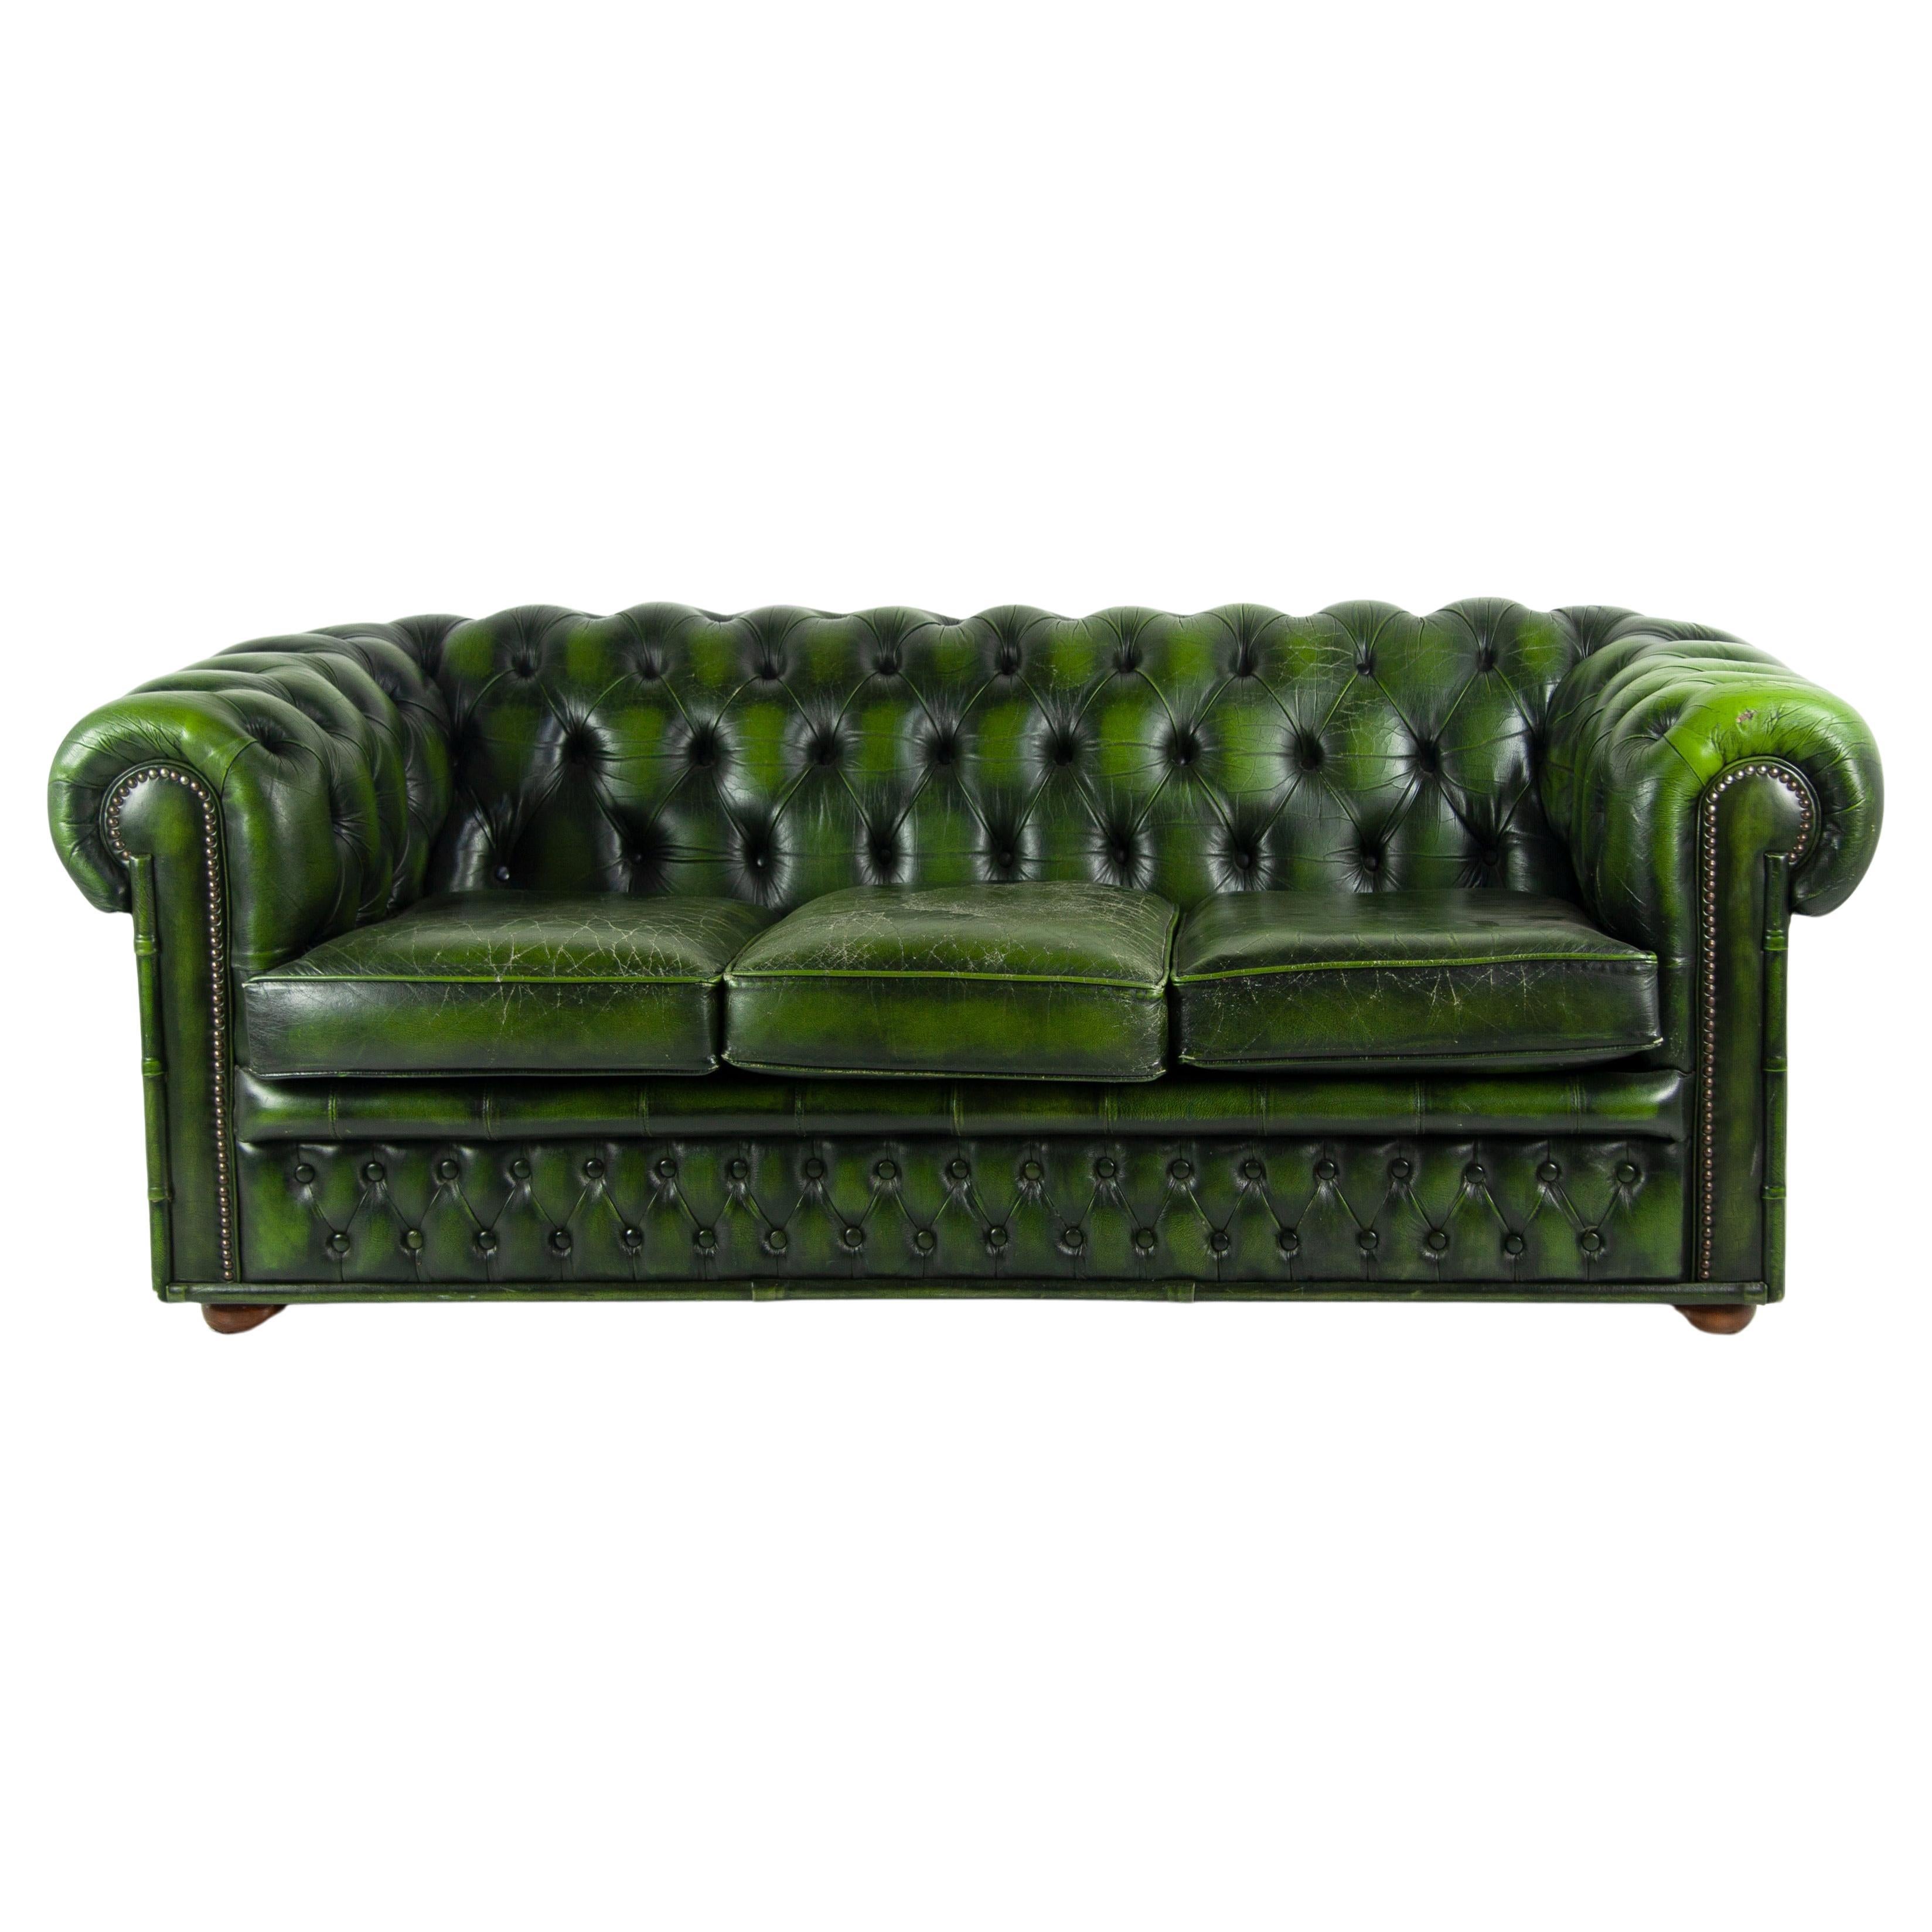 London Chesterfield Sofa in Petrol Green, 1960s For Sale